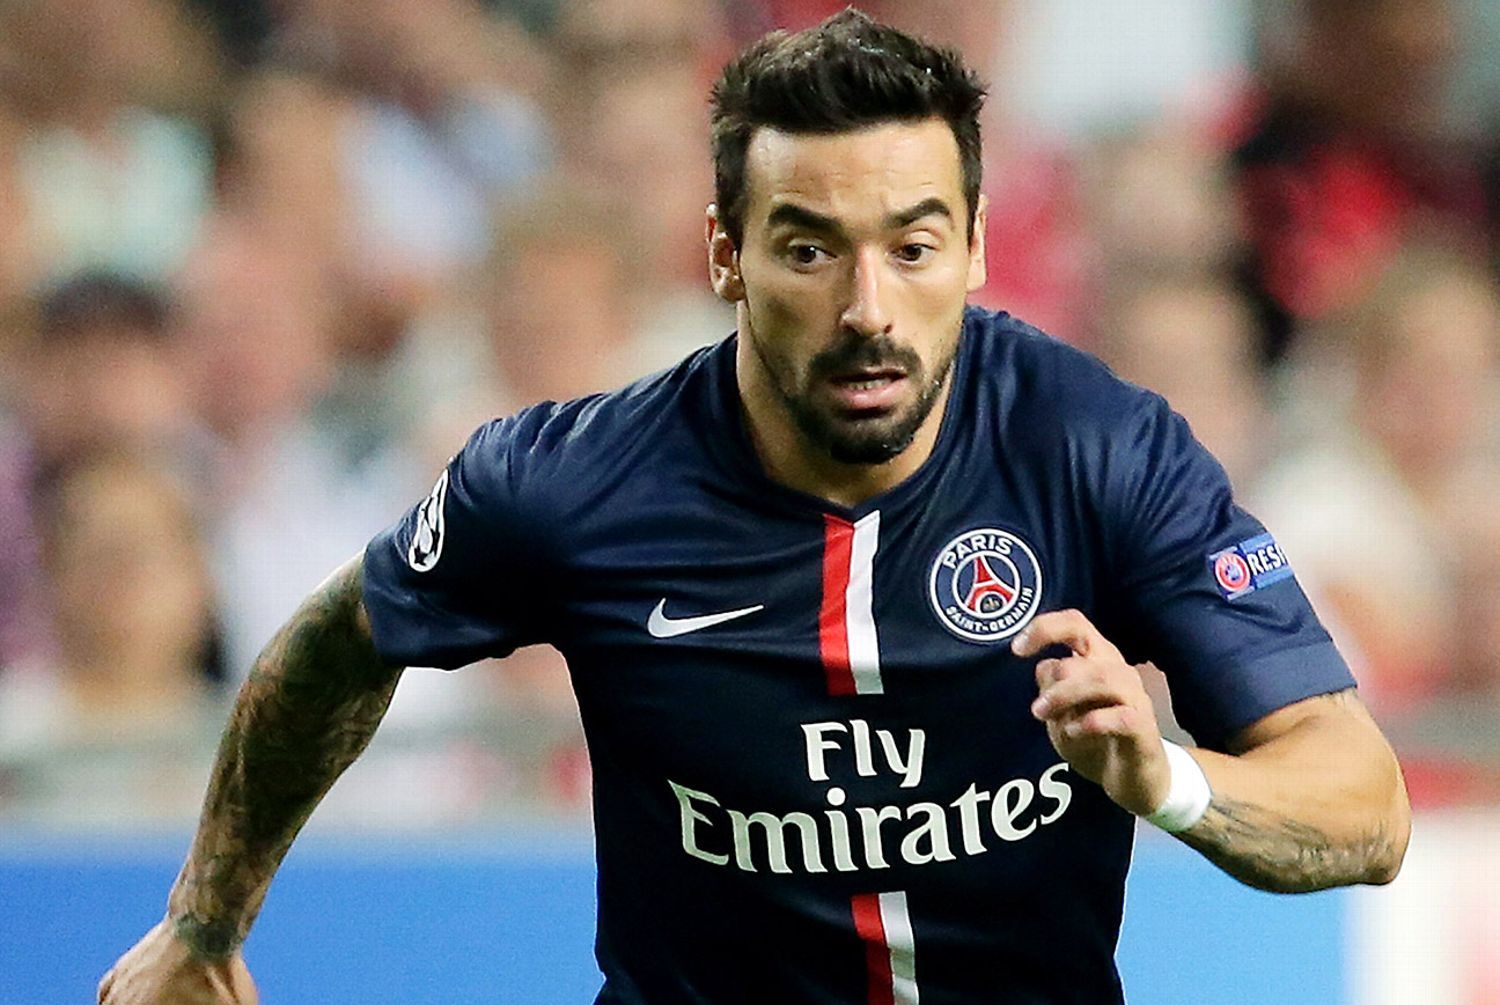 Pedullà: “Inter is working on an offer to Bayern München for Shaqiri, for Lavezzi..